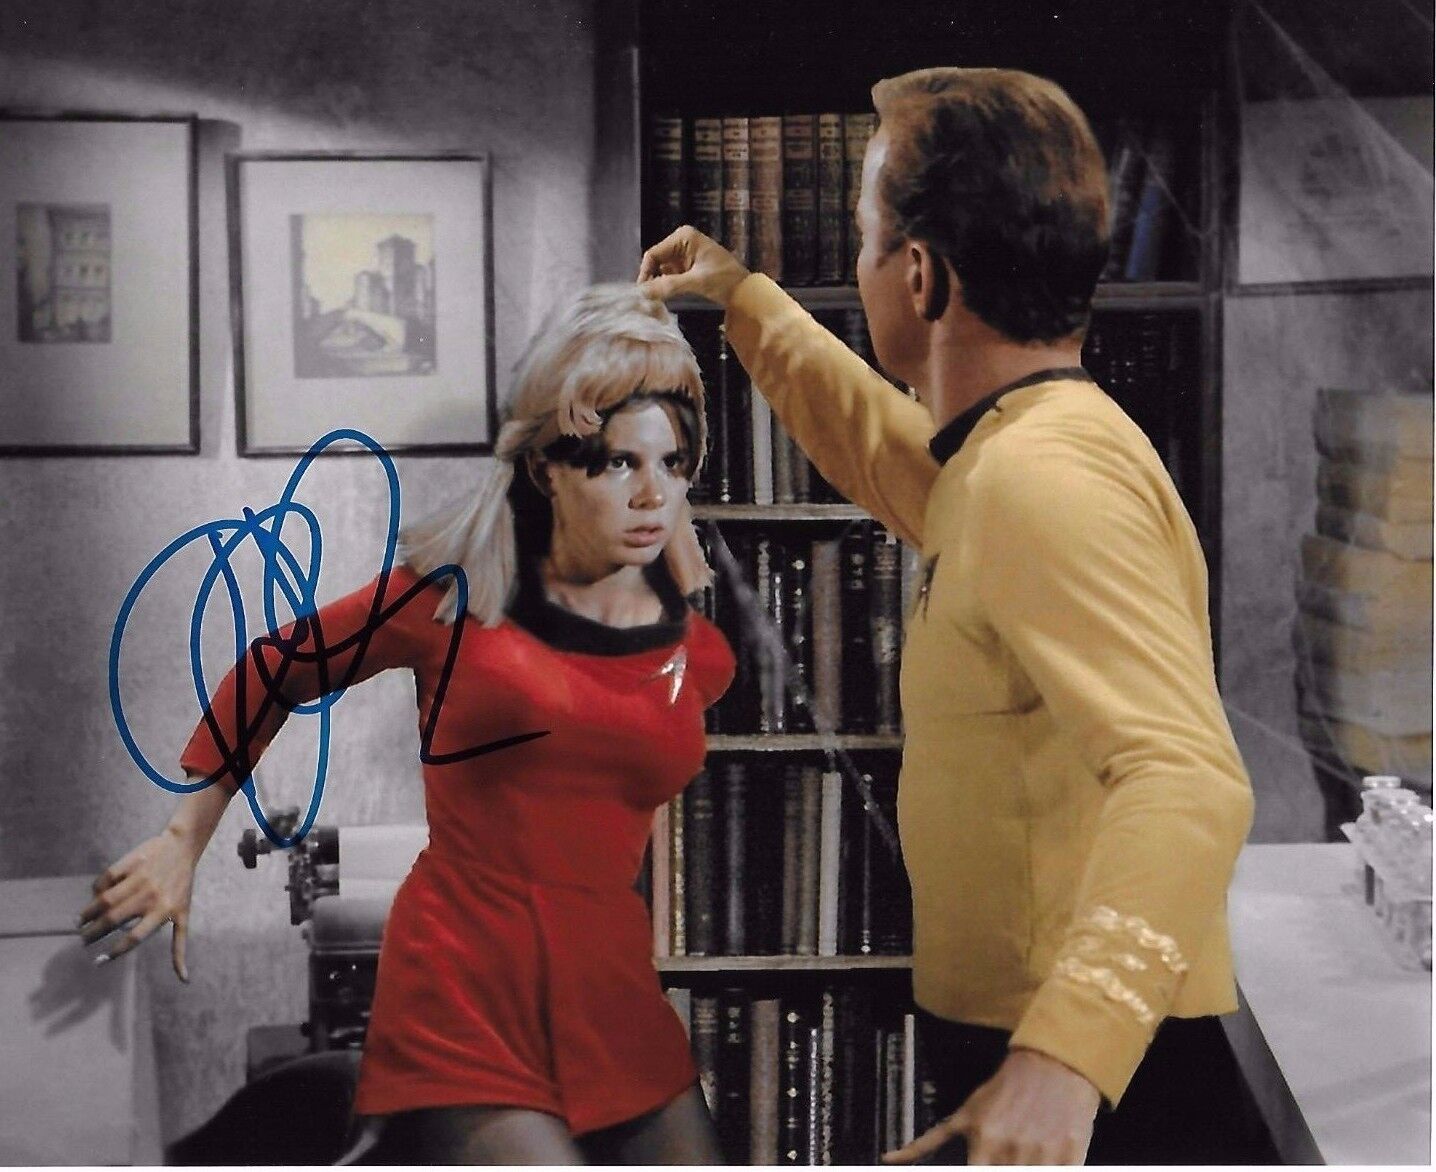 Kim Darby Signed 8x10 Photo Poster painting - Star Trek - Depicted with William Shatner! H75